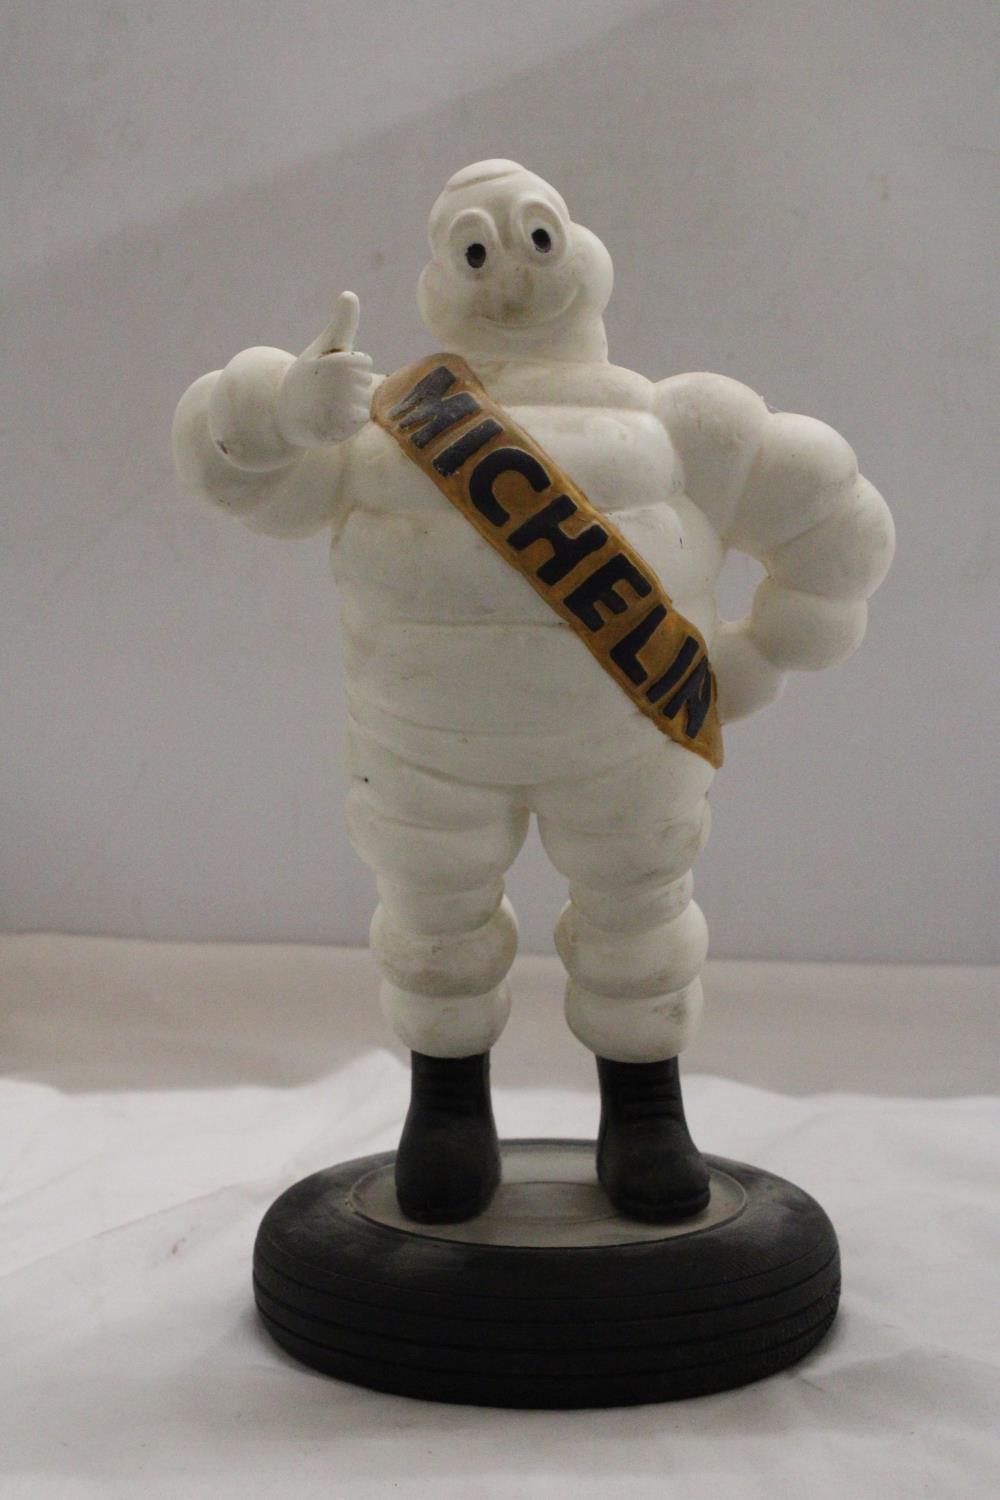 A VINTAGE ORIGINAL MICHELIN MAN ON TYRE APPROXIMATELY 33 CM HIGH - Image 2 of 5